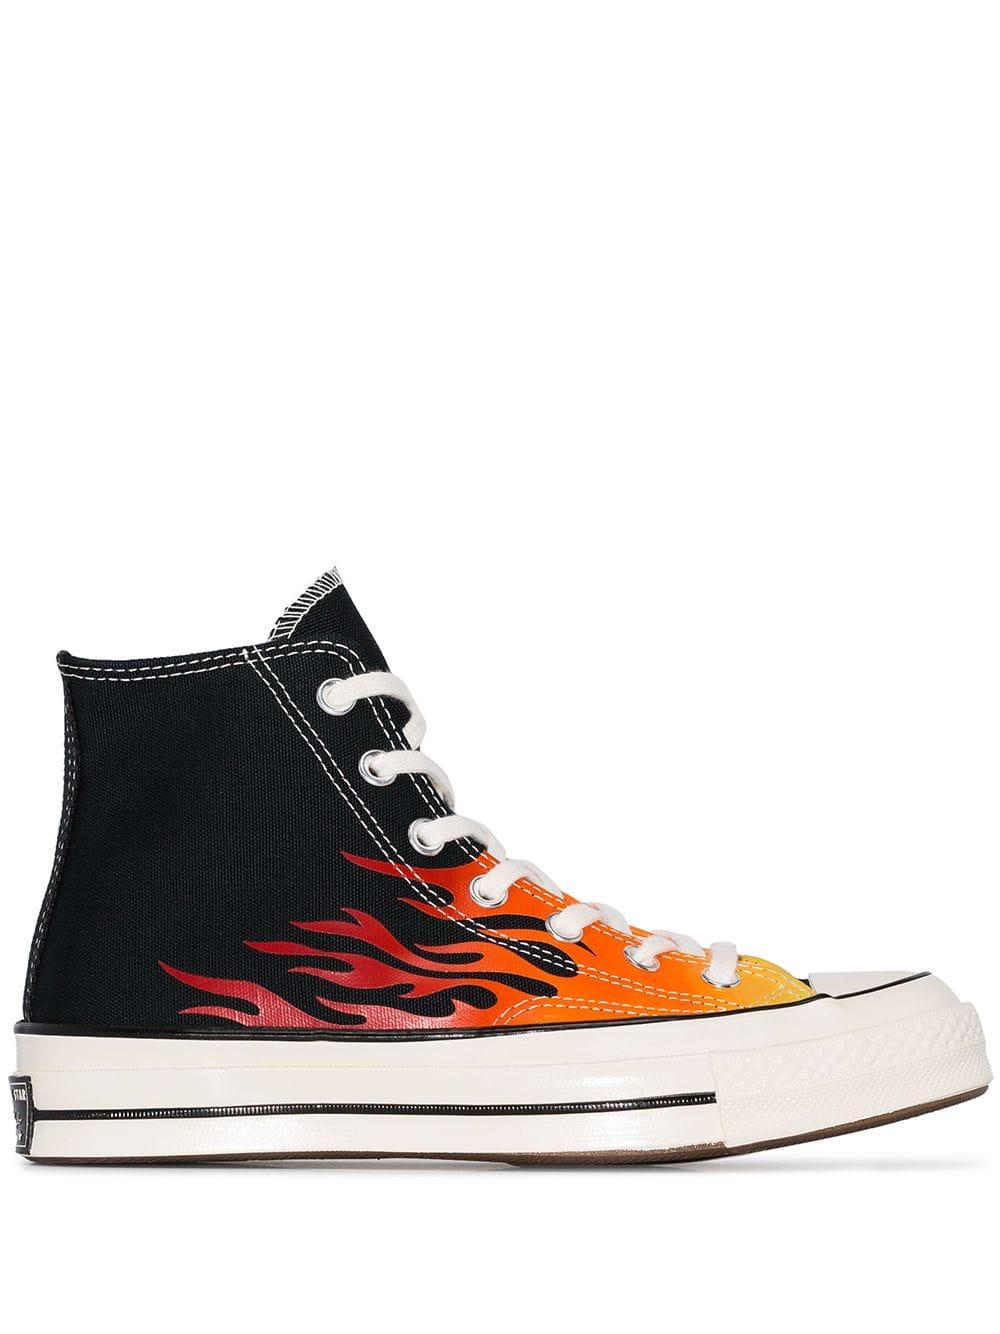 Converse Cotton Chuck 70 Flame-print High-top Sneakers in Black - Lyst